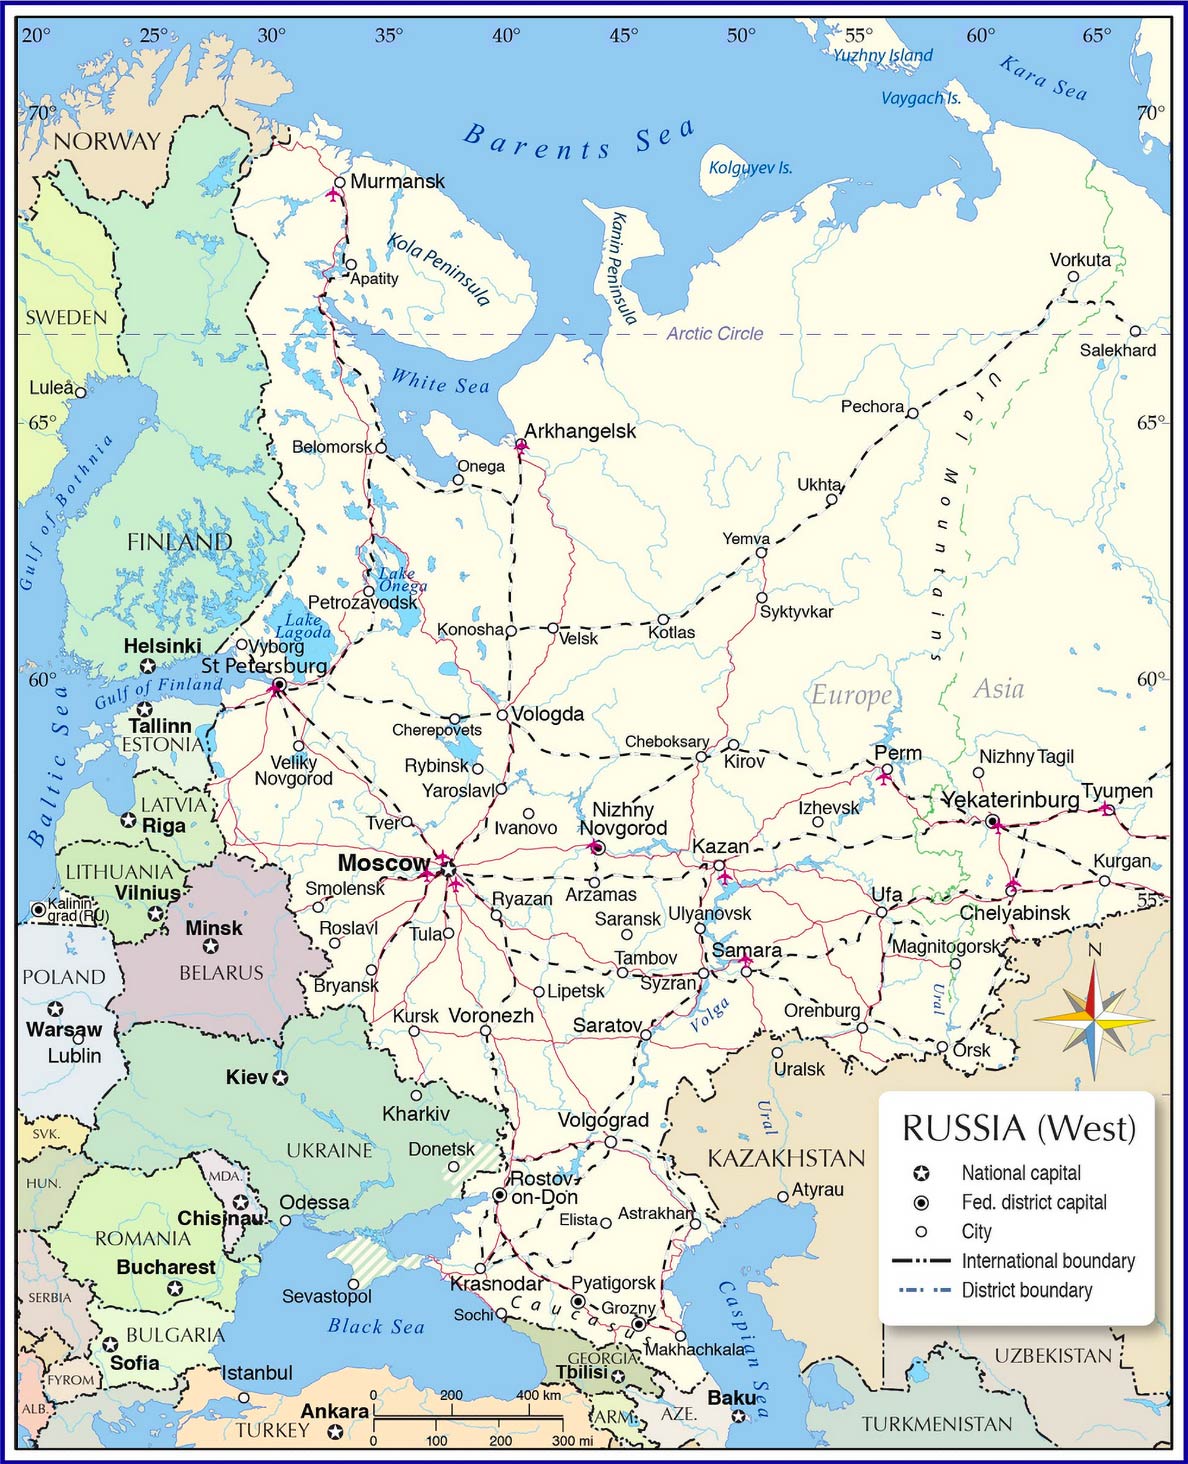 Russia, History, Flag, Population, Map, President, & Facts